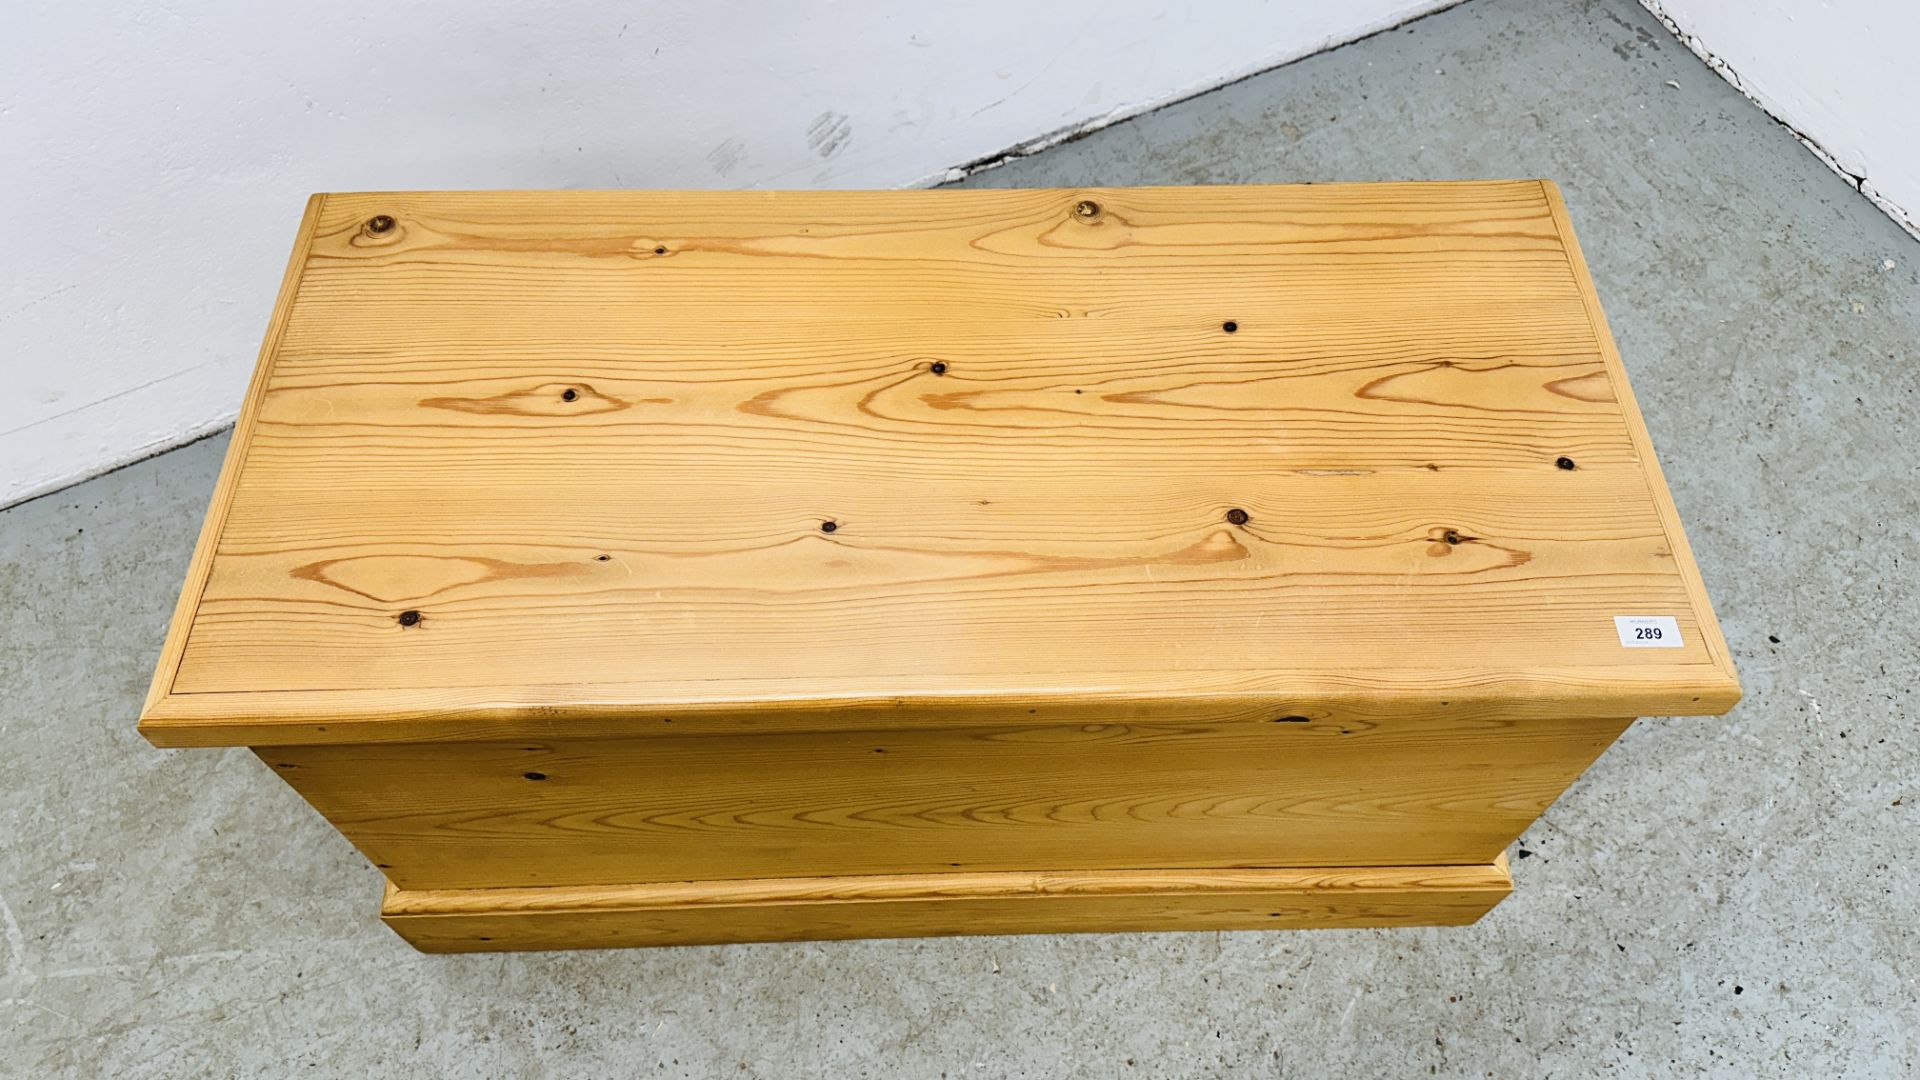 MODERN WAXED PINE HINGED TOP BLANKET / TOY BOX - W 96CM X D 44CM X H 50CM. - Image 2 of 7